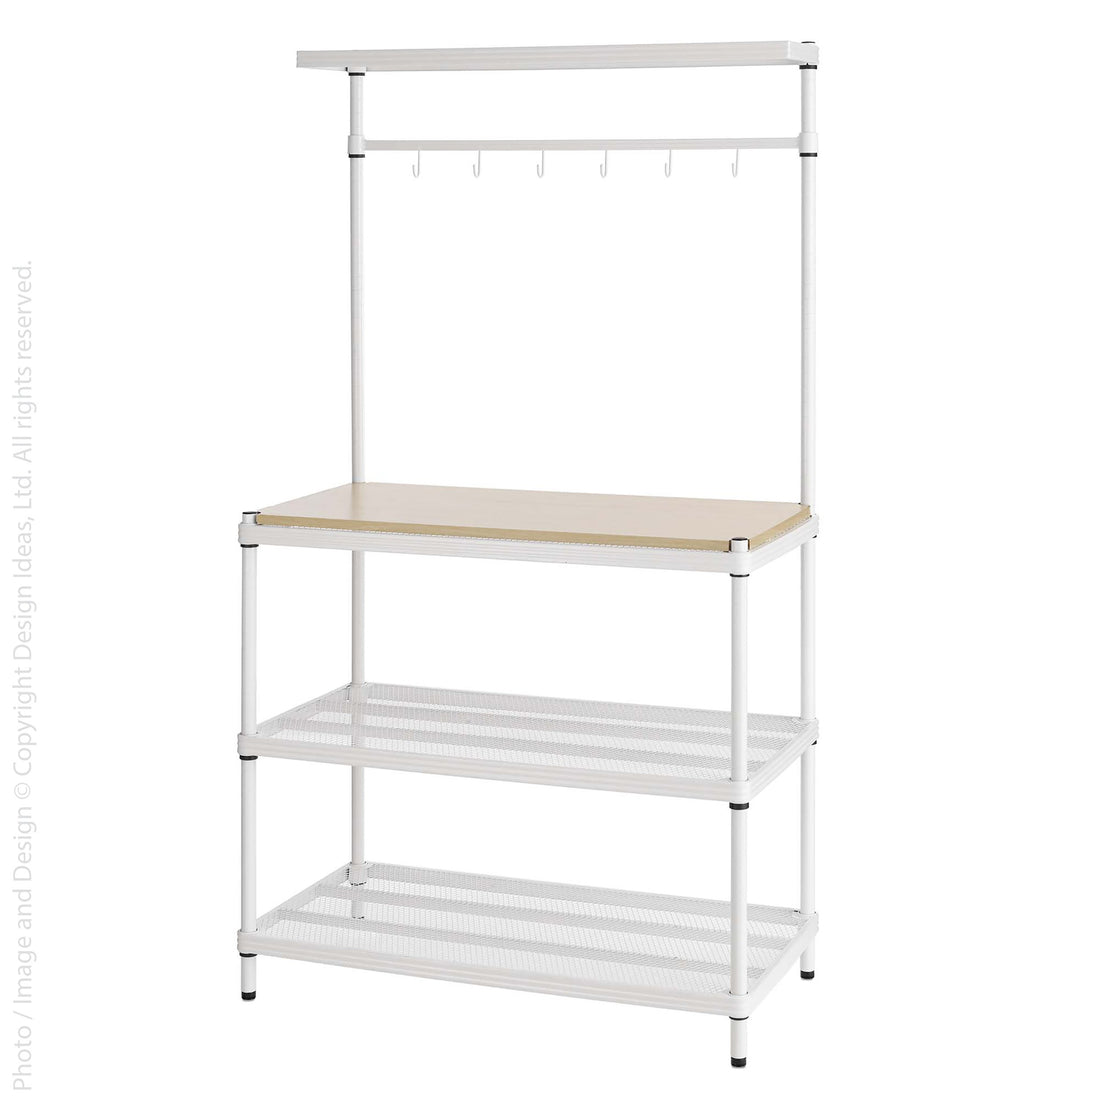 Shelving Inc. 5 Hook Attachment for Wire Shelving